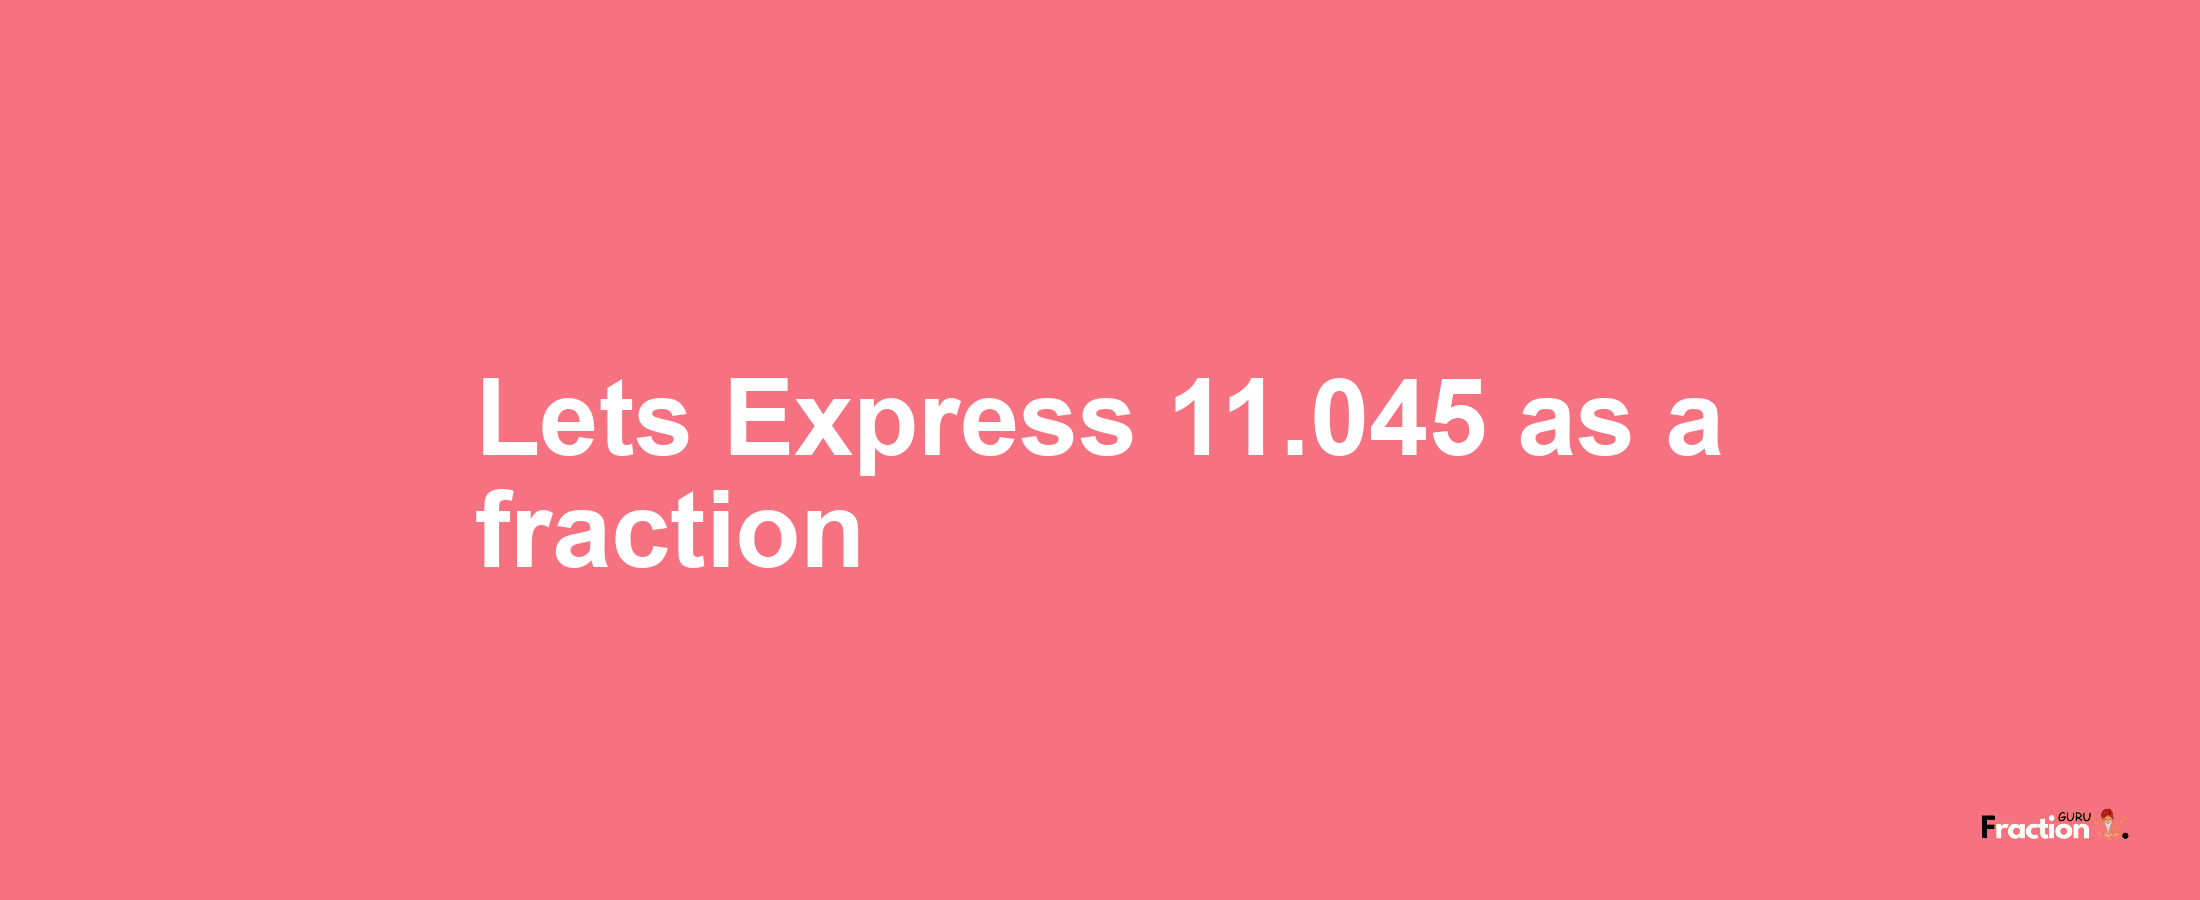 Lets Express 11.045 as afraction